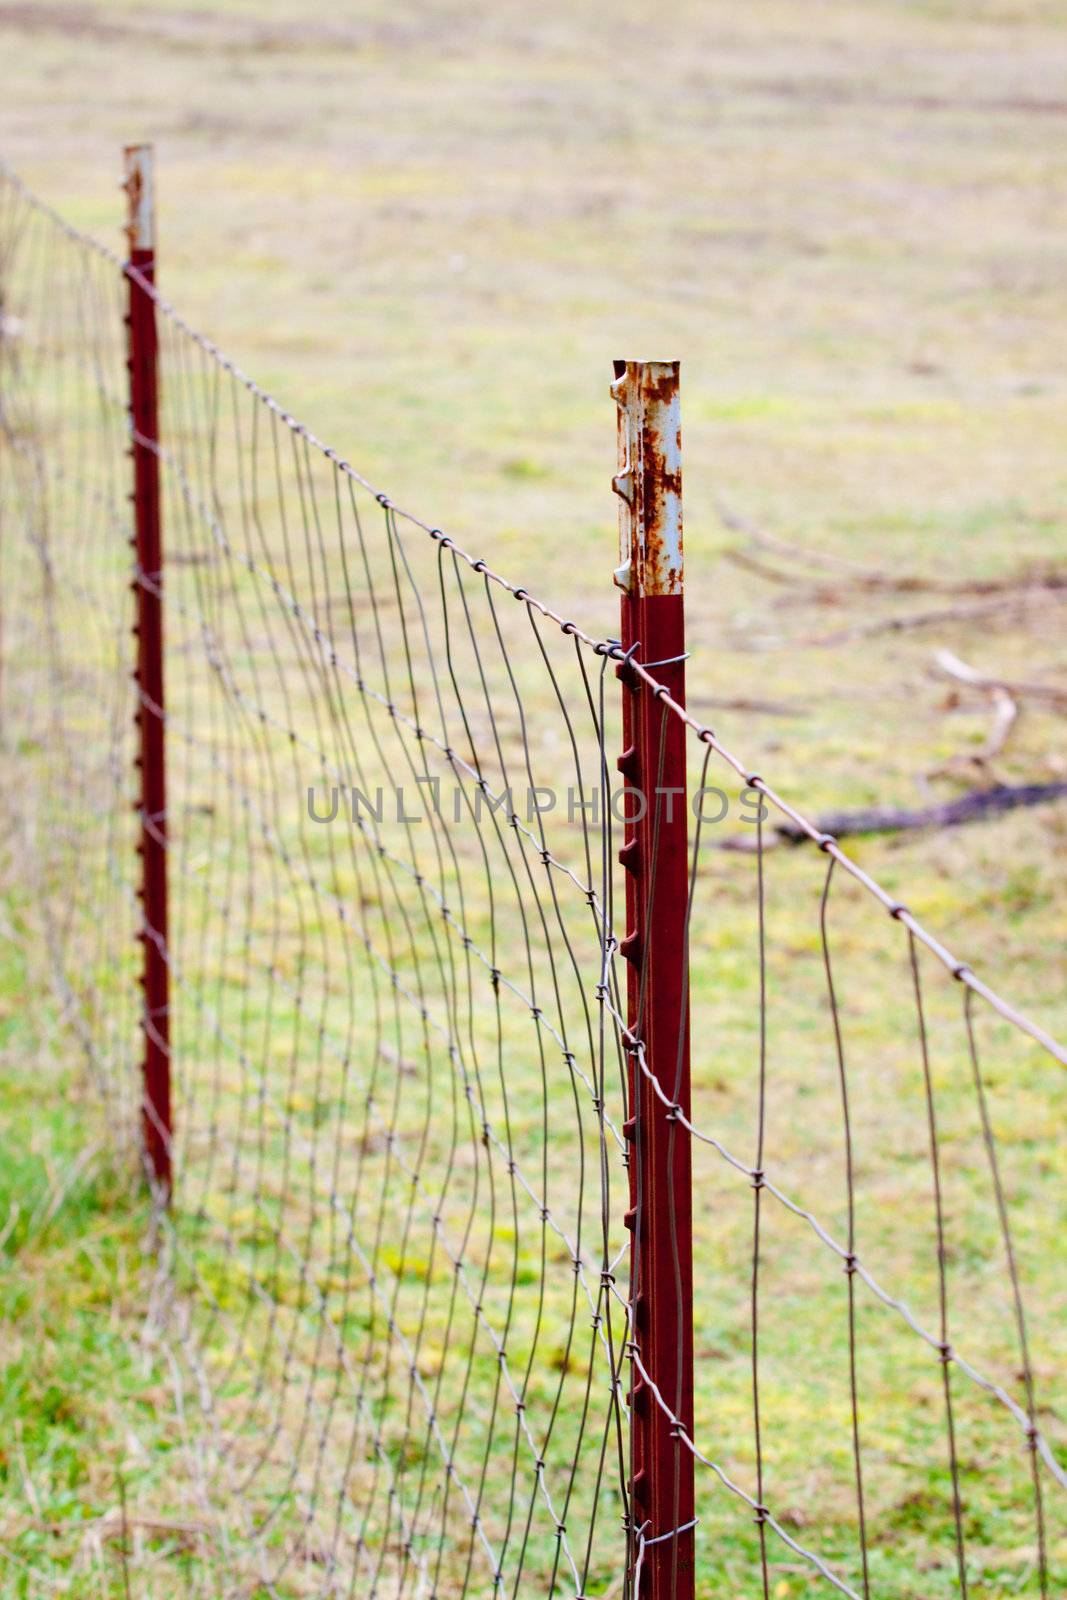 Fence Posts by joshuaraineyphotography